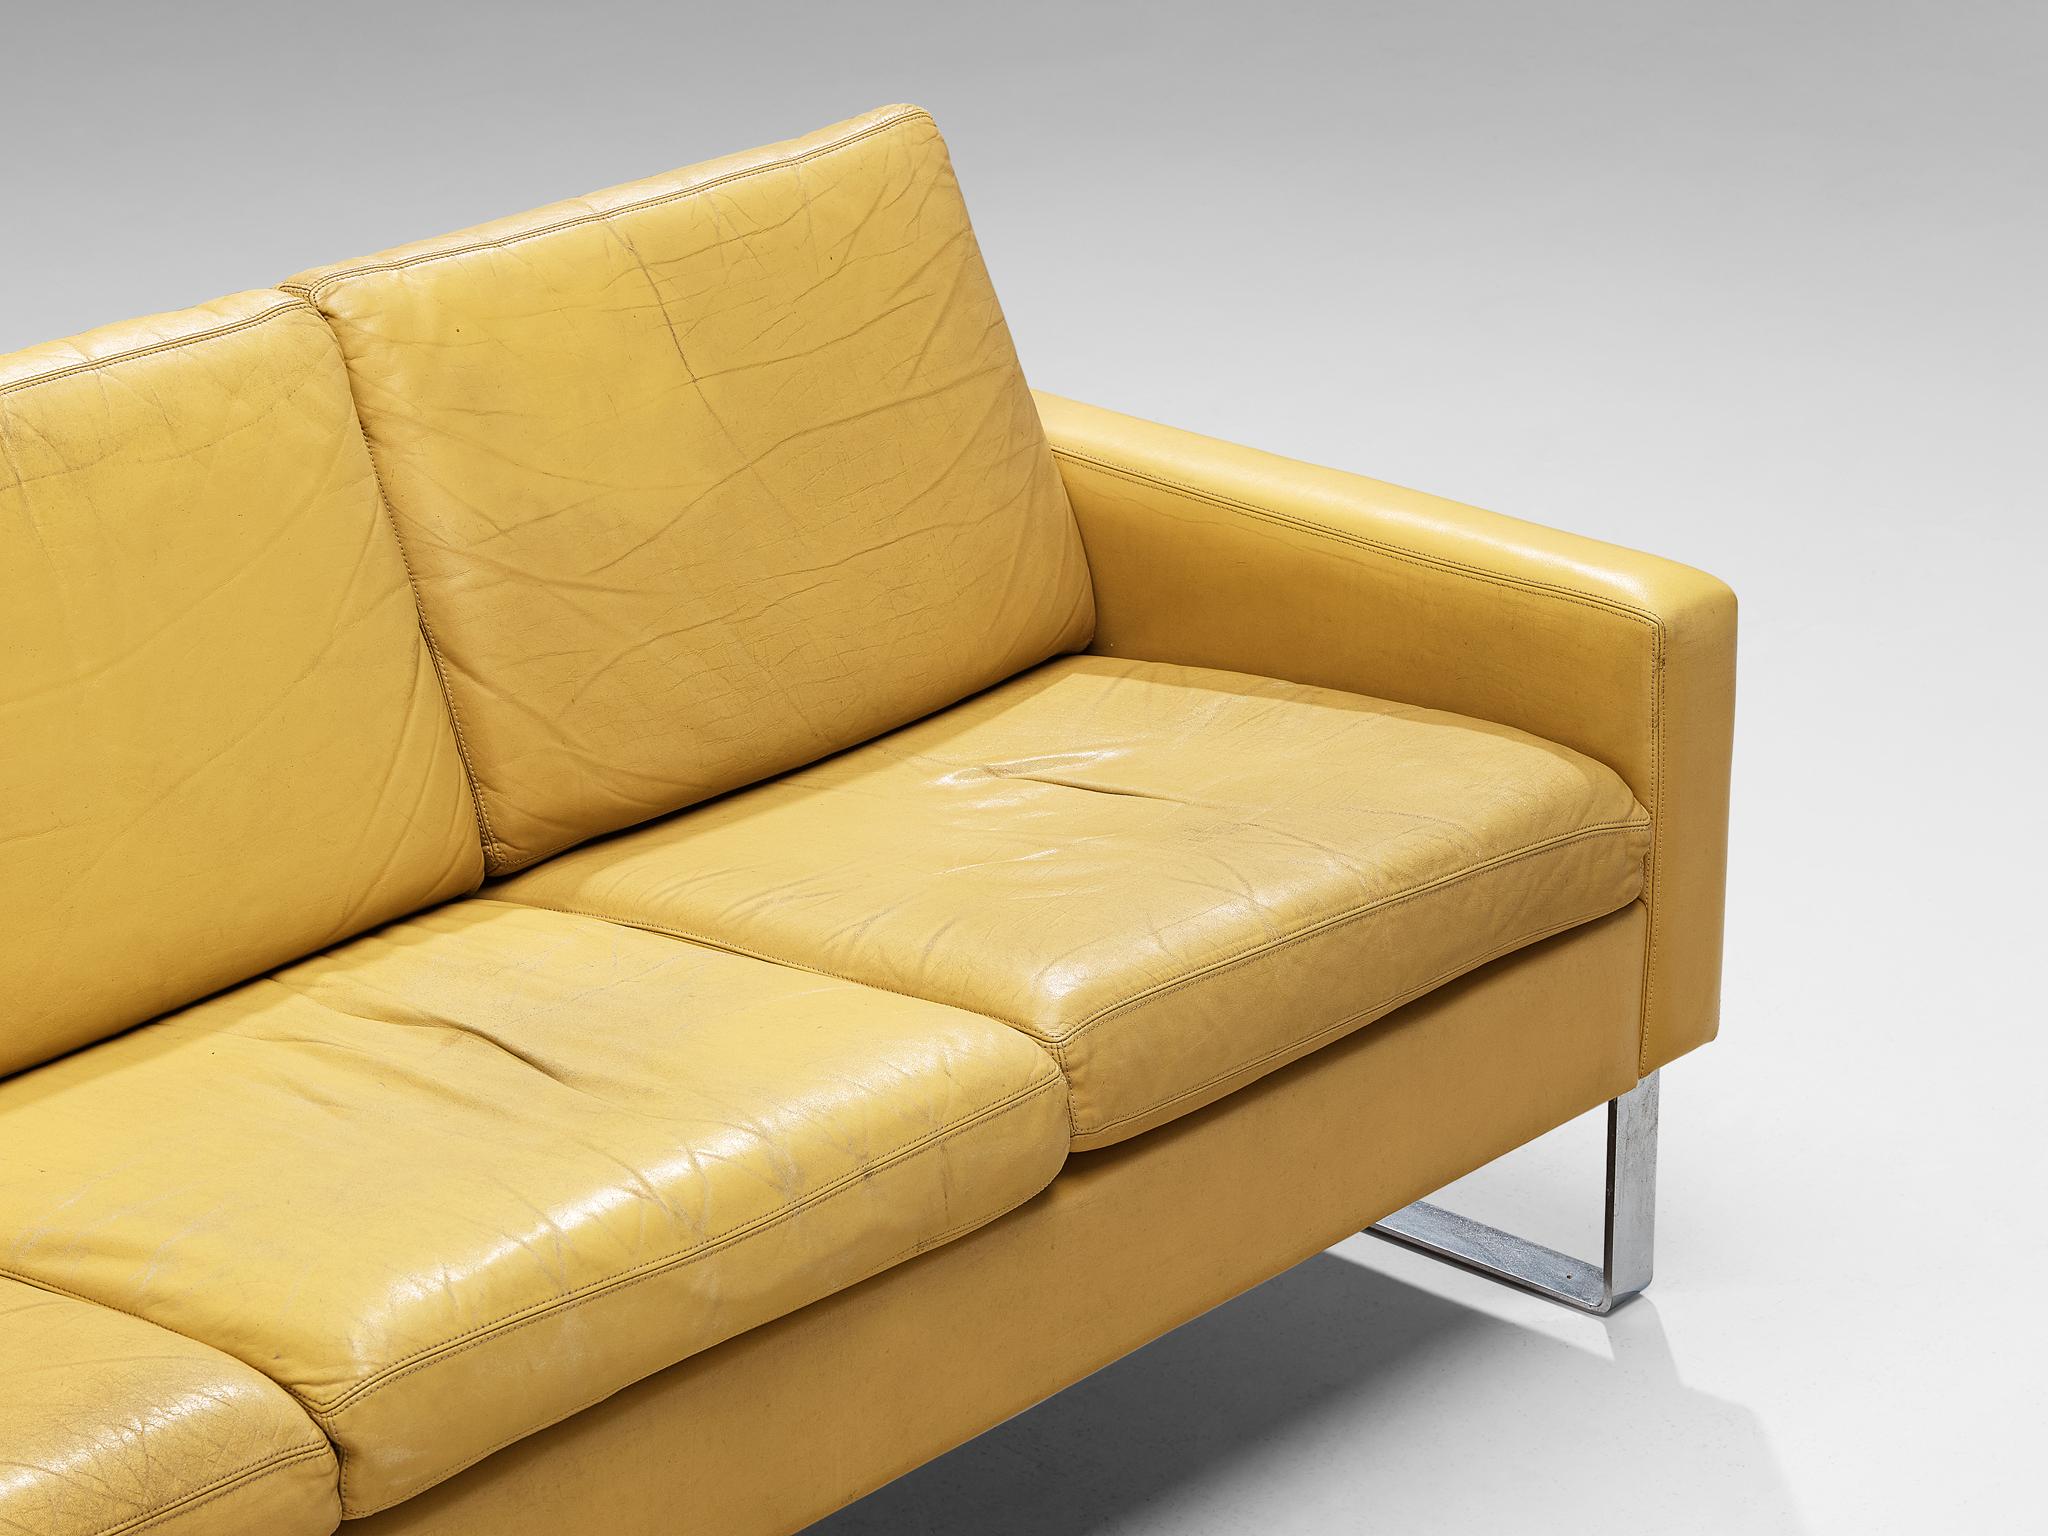 German Mid-Century Modern Sofa in Camel Yellow Leather and Steel For Sale